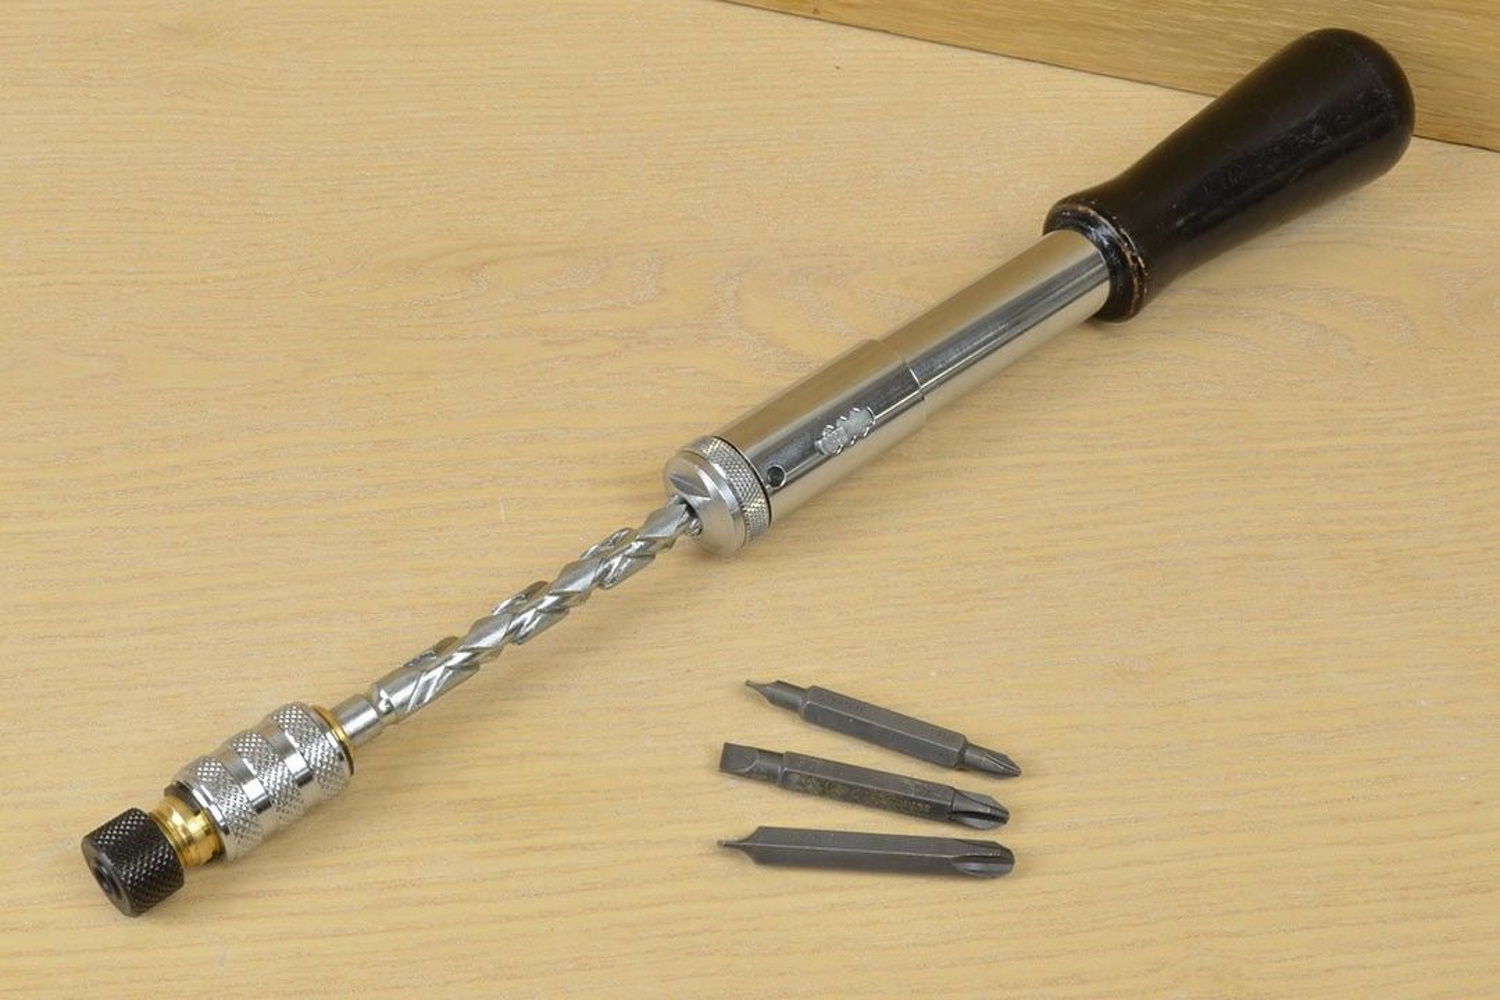 Best Yankee screwdrivers: Give your wrist a rest